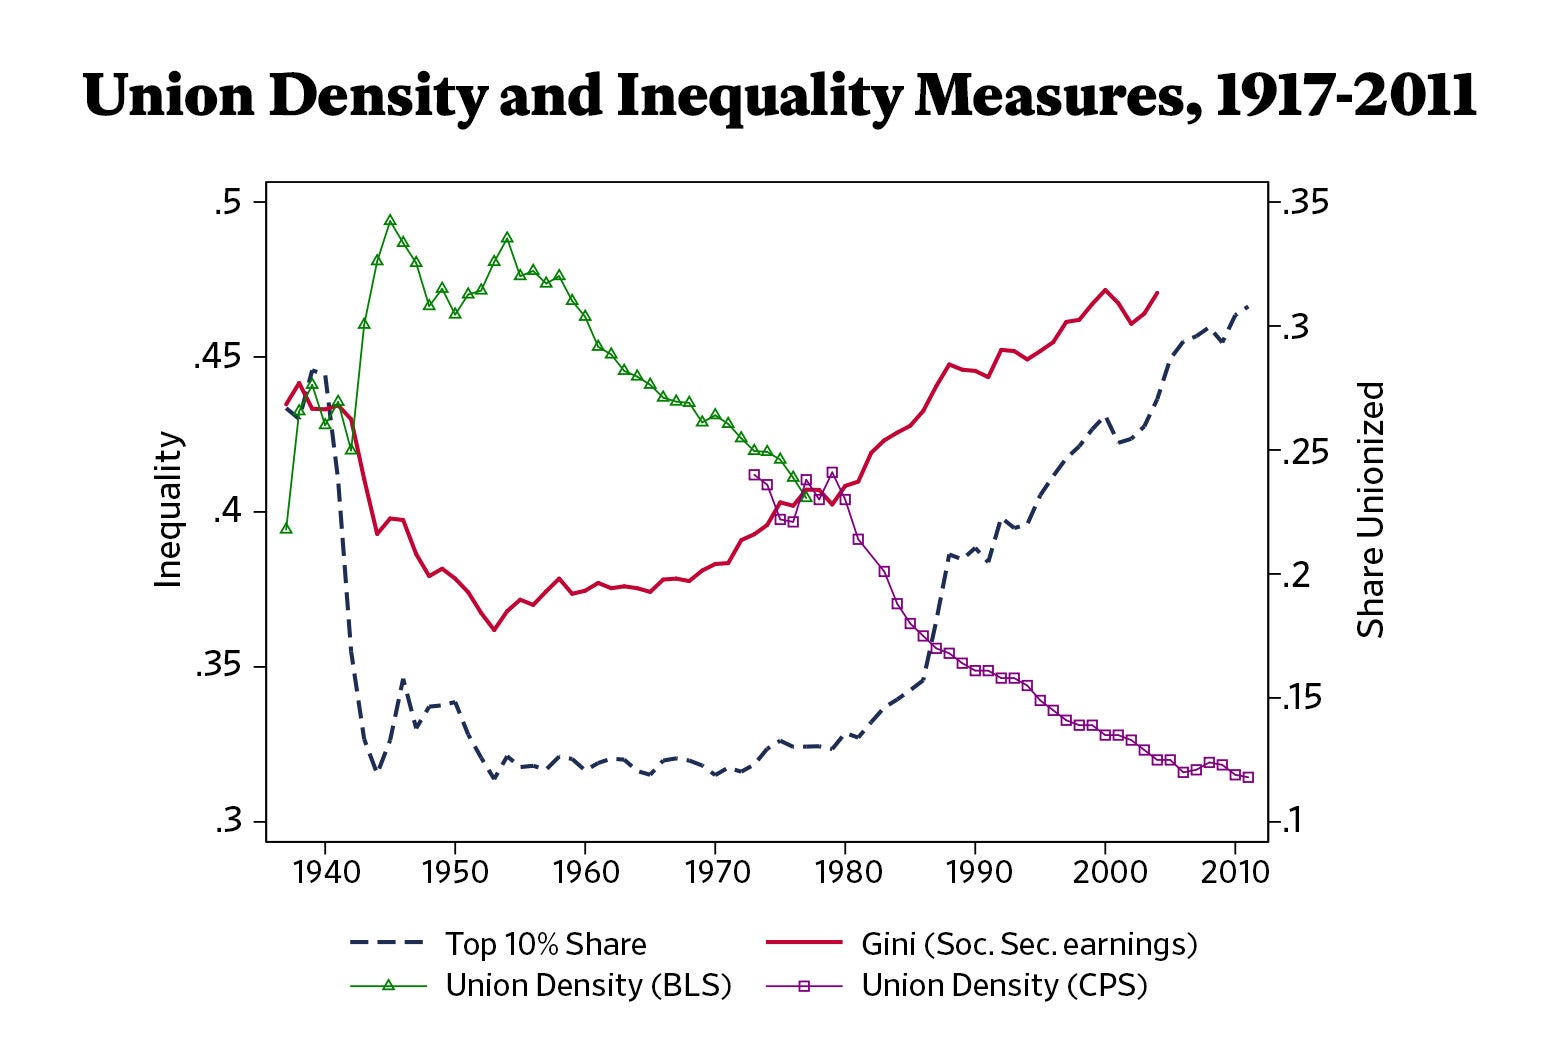 Chart showing union density and inequality measures, 1917-2011.